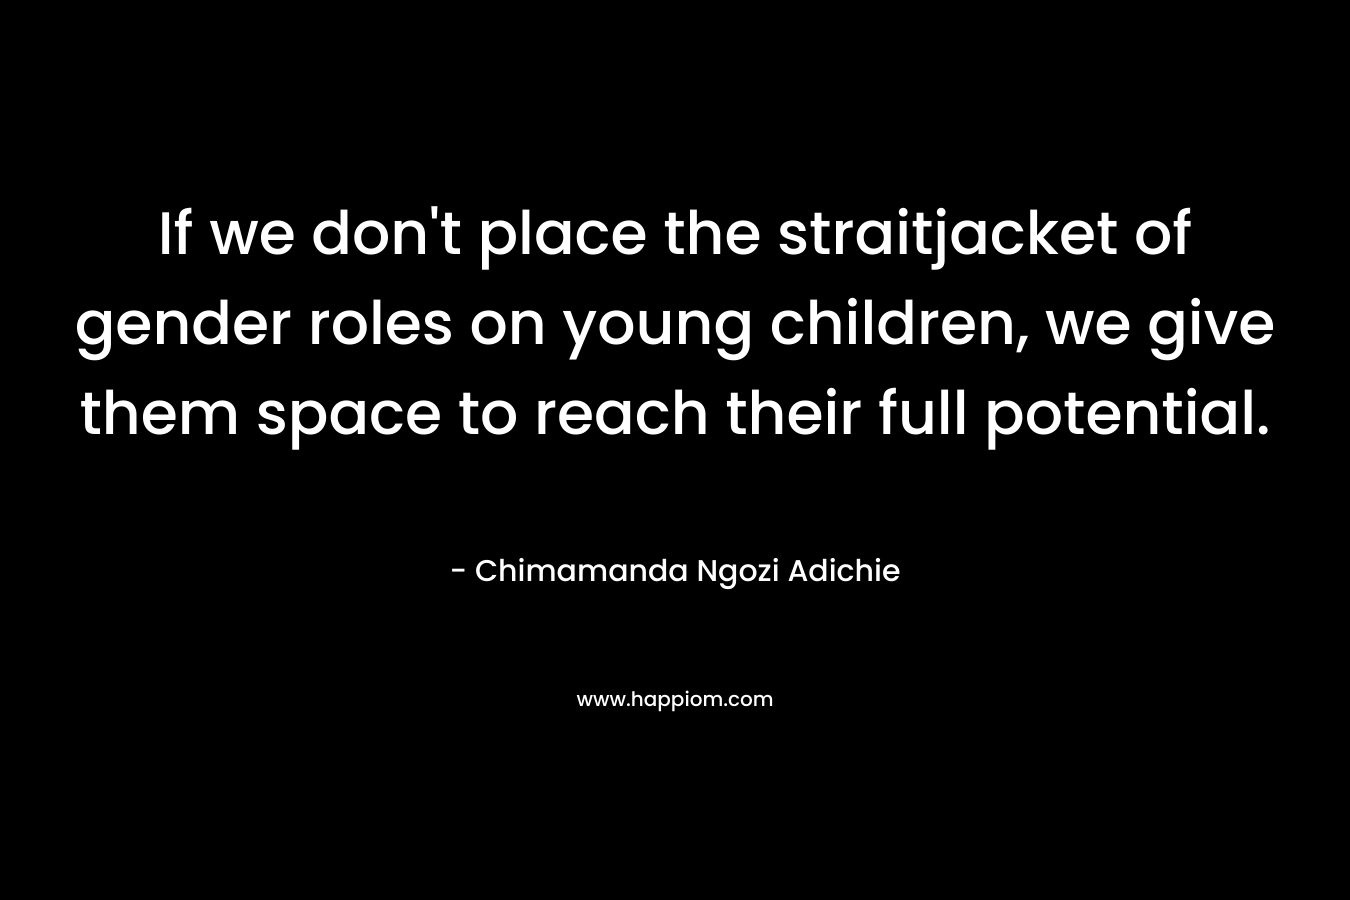 If we don’t place the straitjacket of gender roles on young children, we give them space to reach their full potential. – Chimamanda Ngozi Adichie